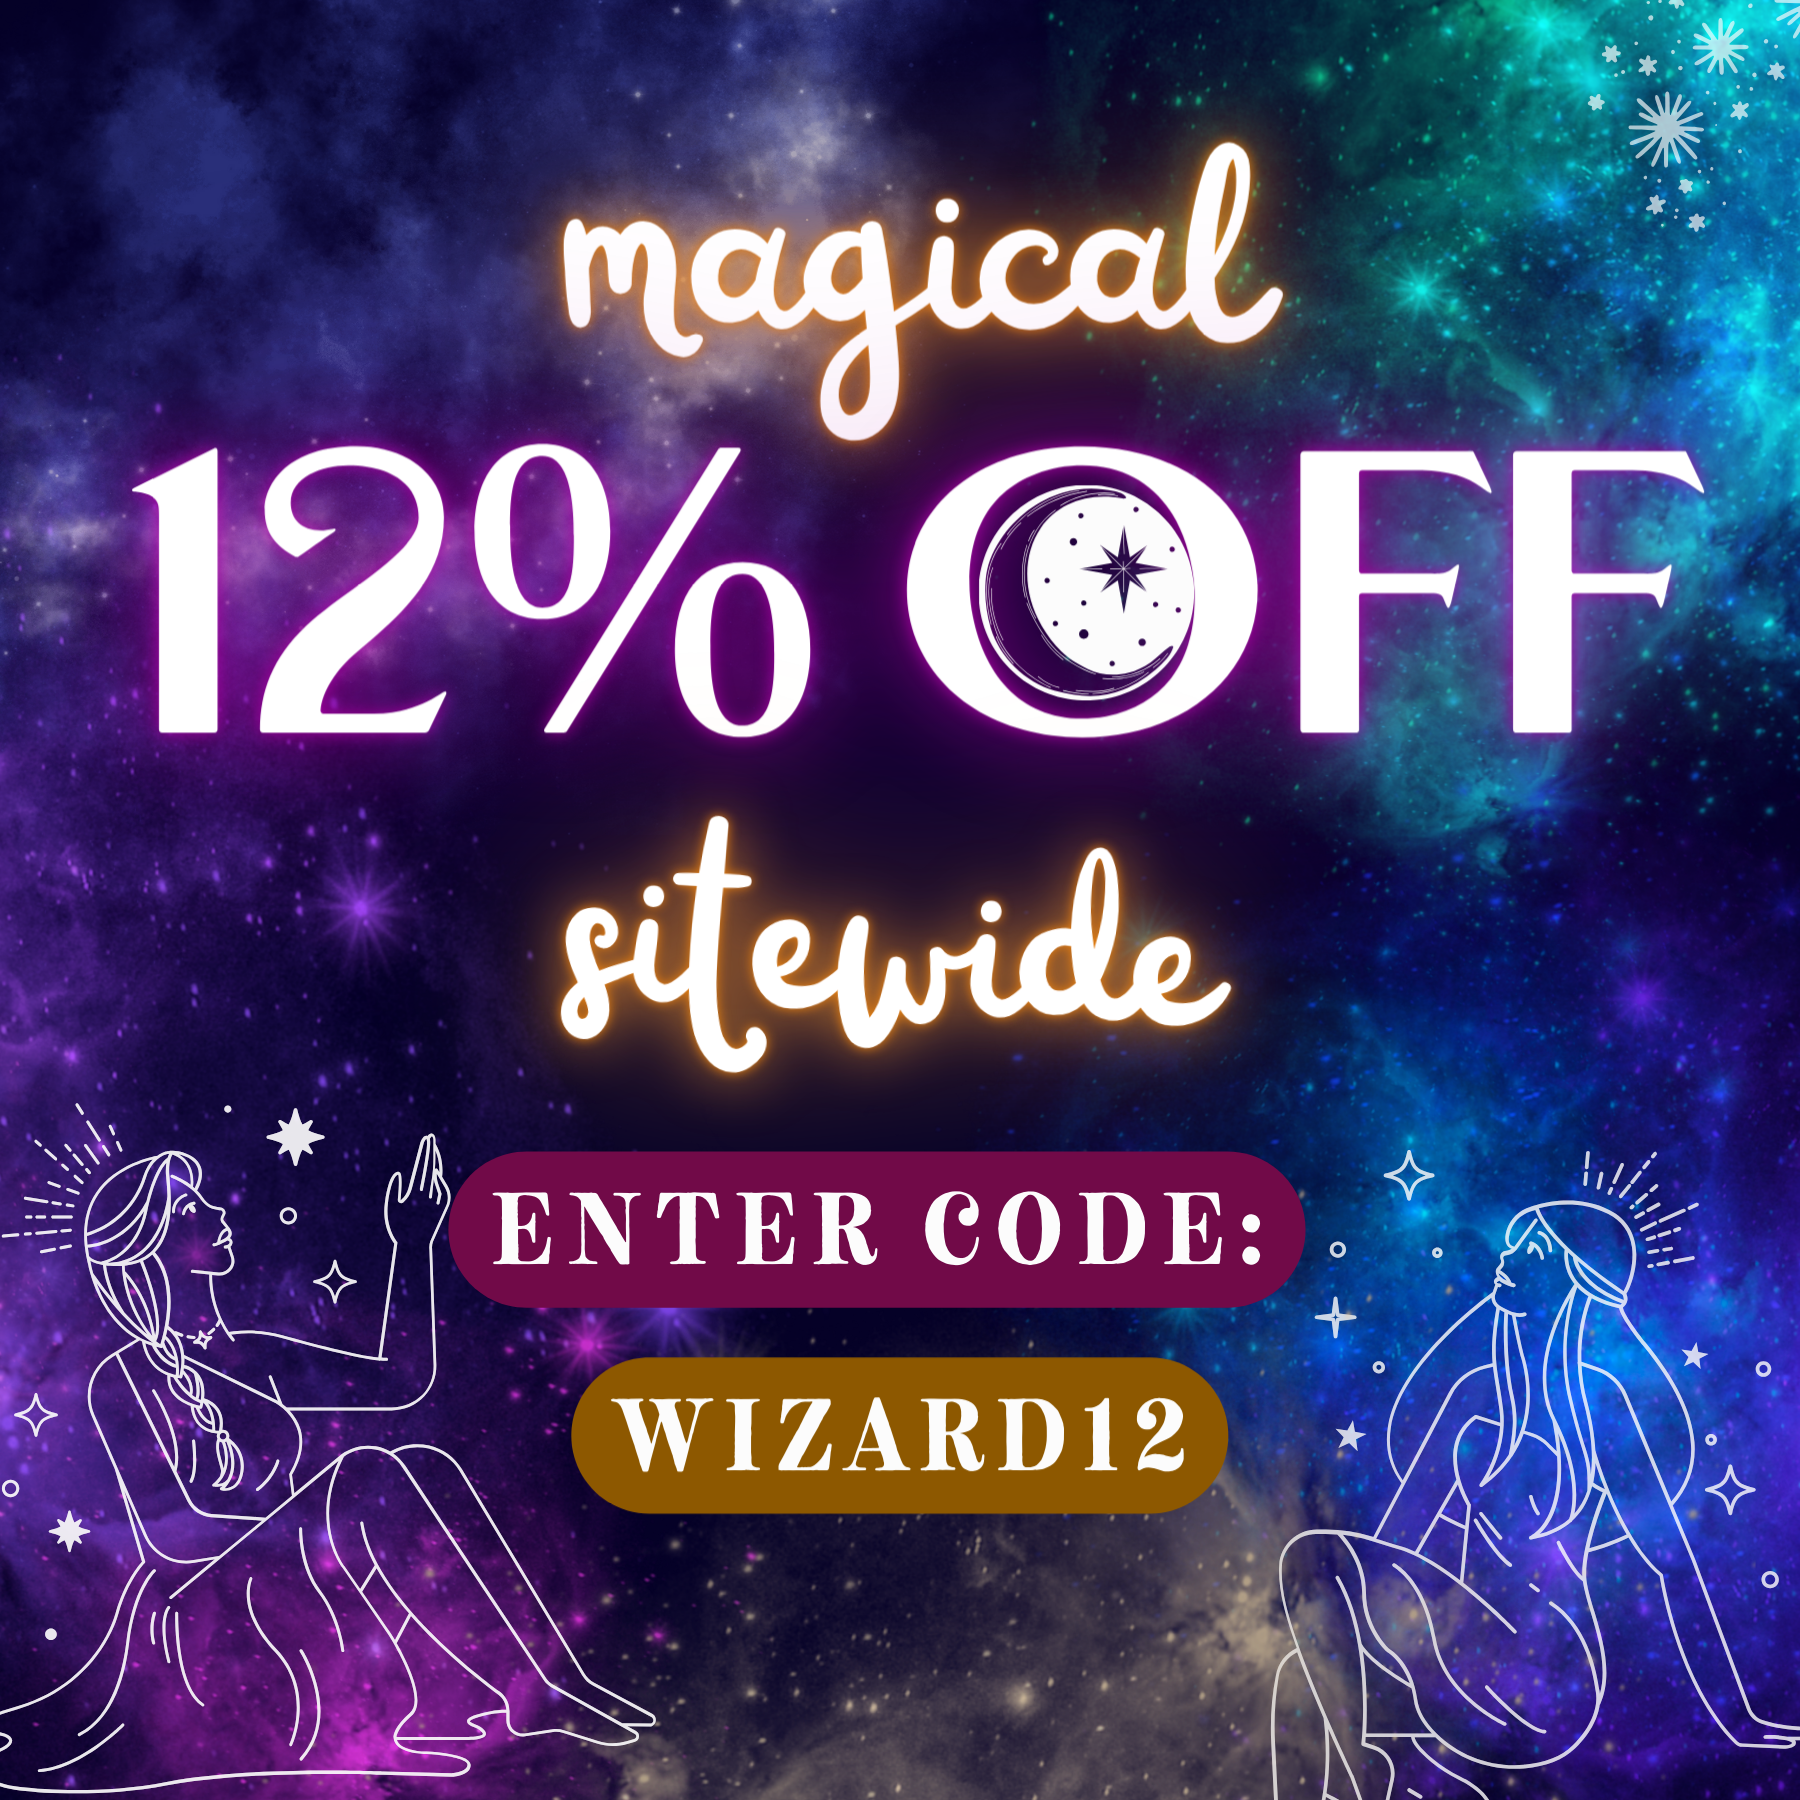 🌟 Unveil the enchantment of savings with our magical 12% off sitewide event! 🌟